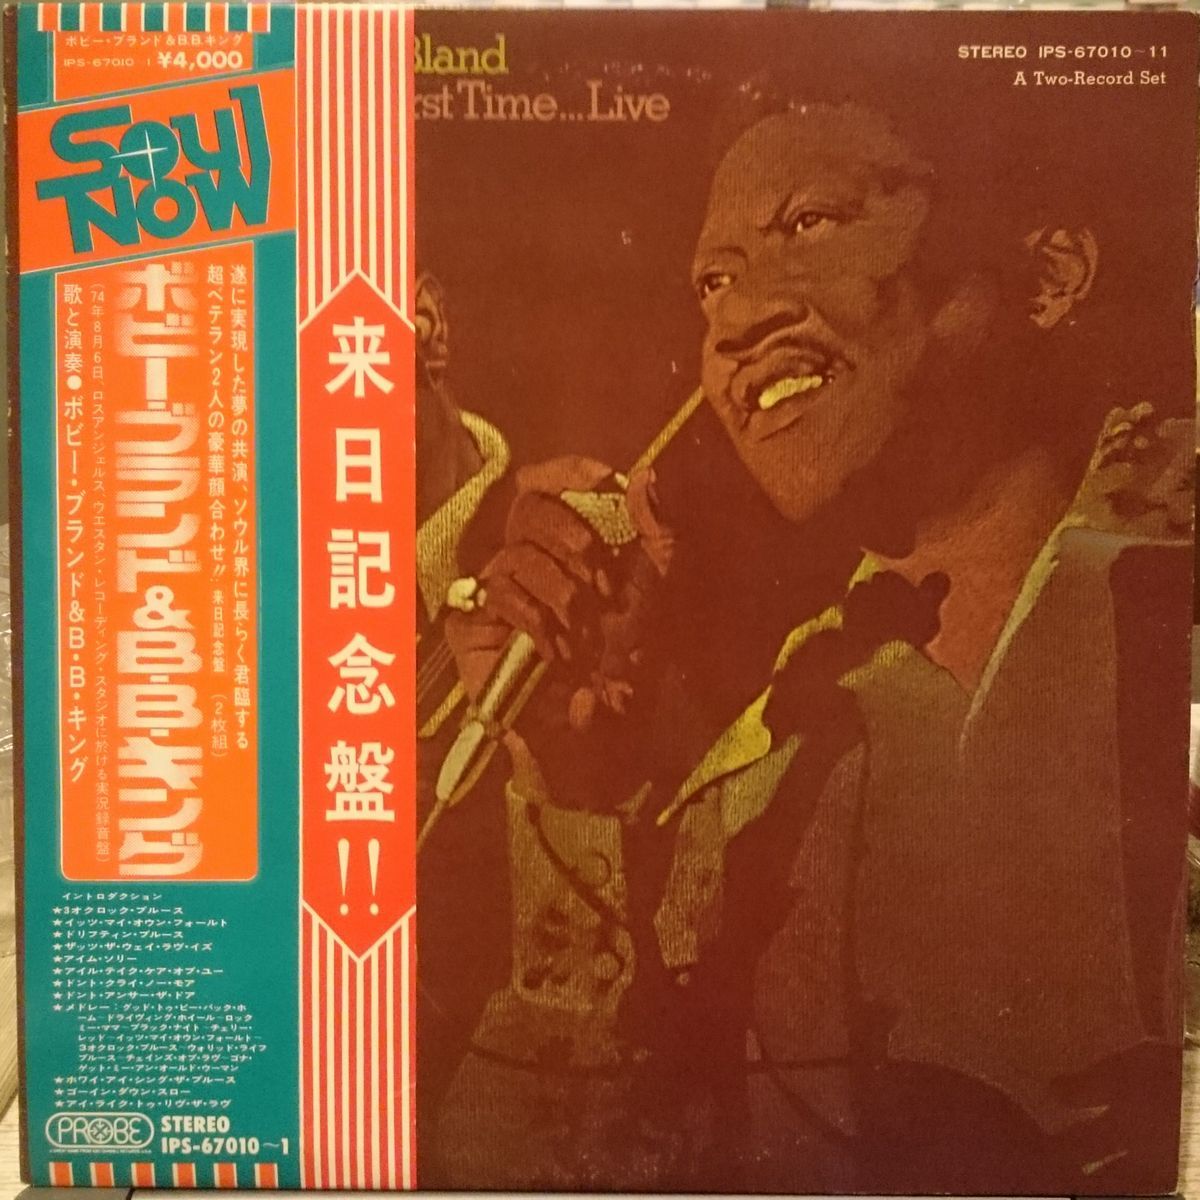 BOBBY BLAND & B.B.KING - Together For The First Time...Live (PROBE ...